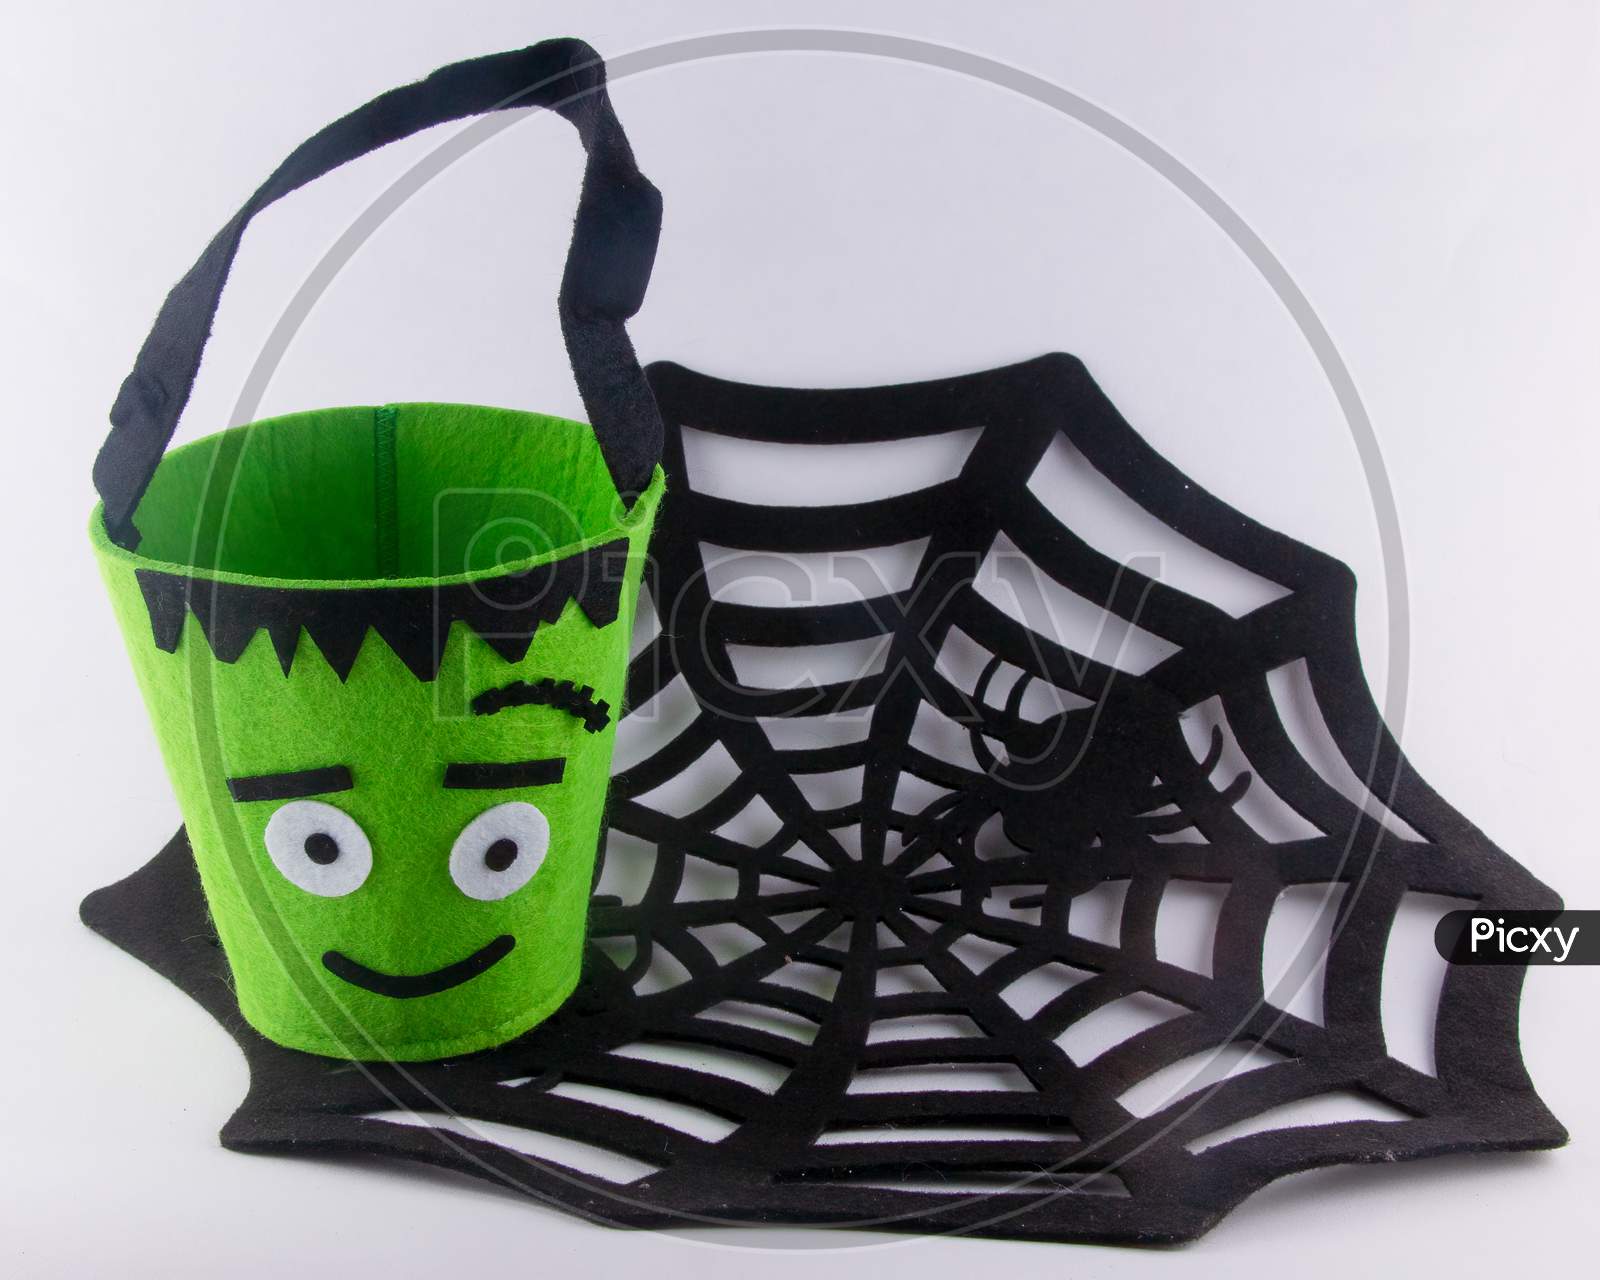 Halloween Fun For Kids Going Out To Trick Or Treat. Green Monster Candy Bag On Black Spider Web With Copy Space